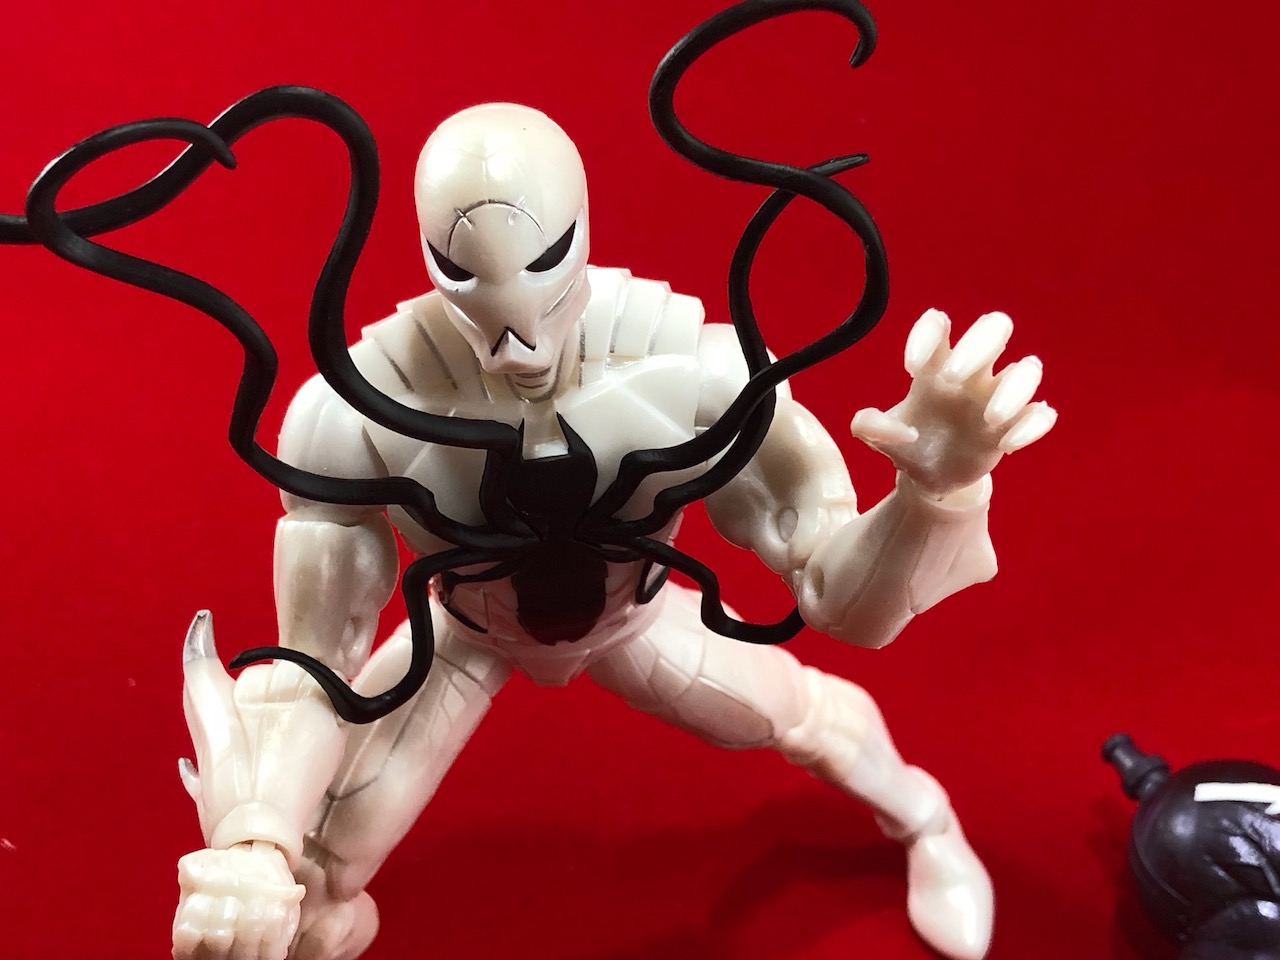 Marvel Legends Poison 6-inch action figure unboxing and review